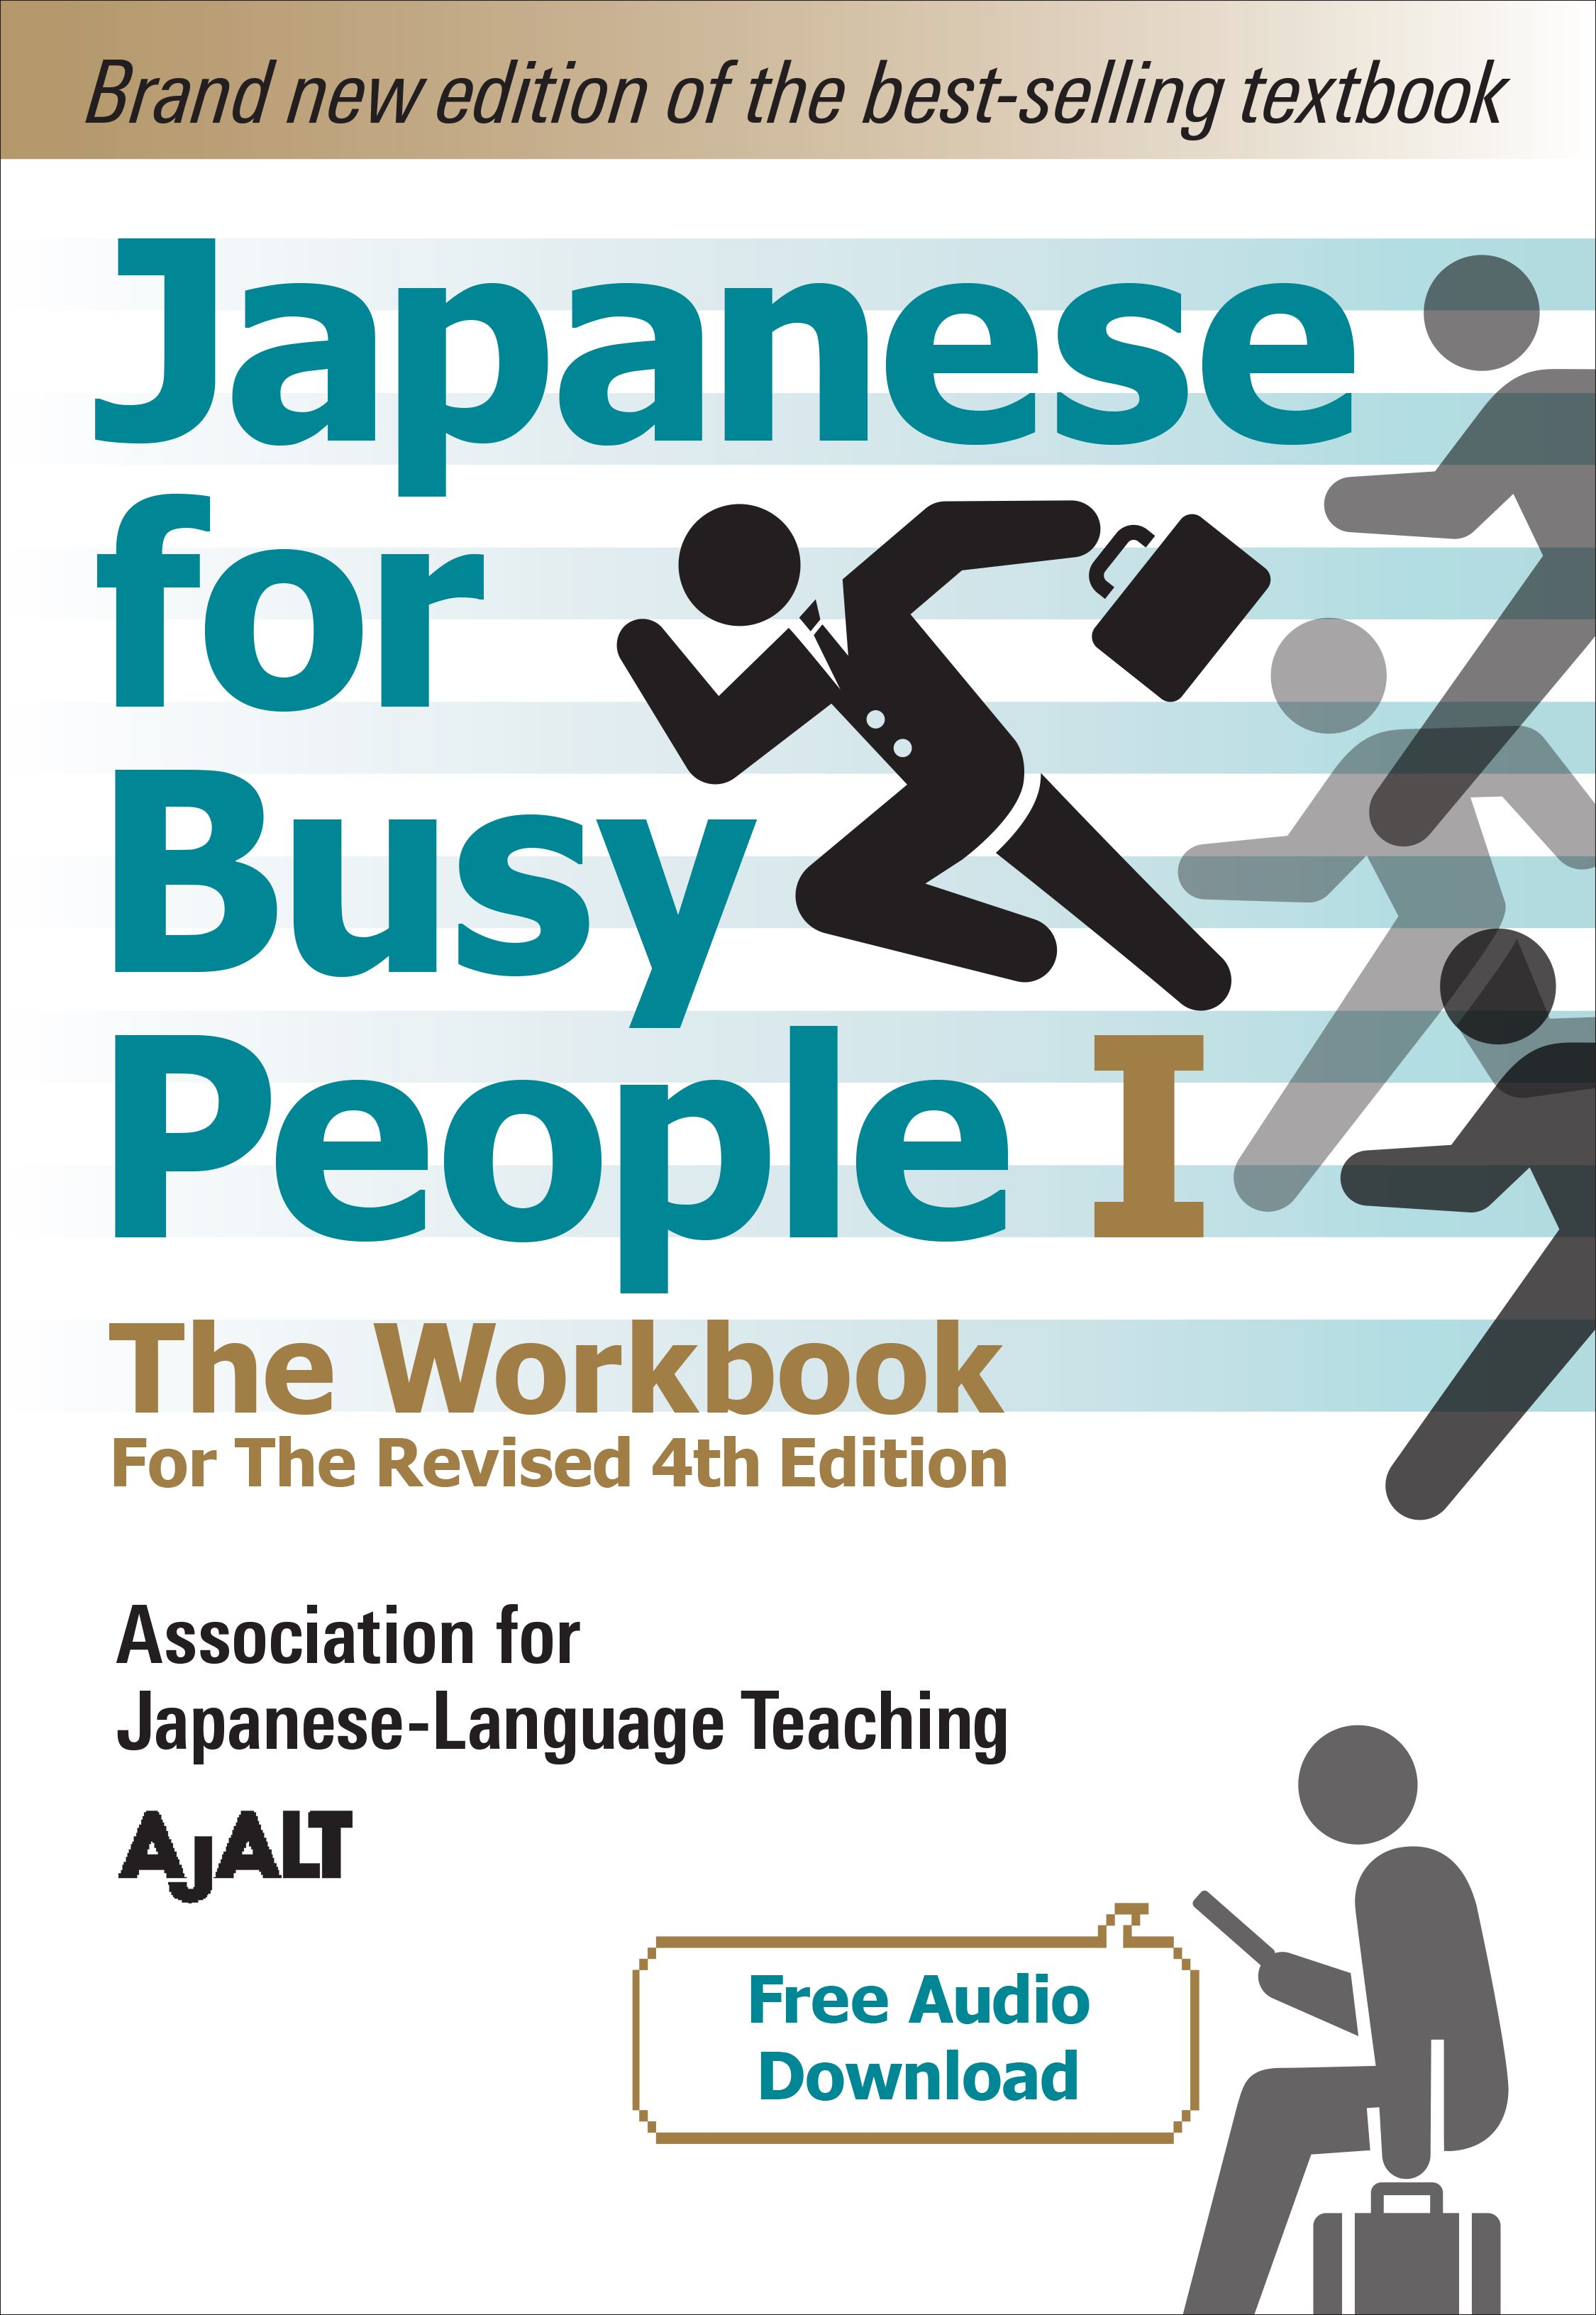 Japanese for Busy People Paperback Volume 1 The Workbook (4th Revised Edition)